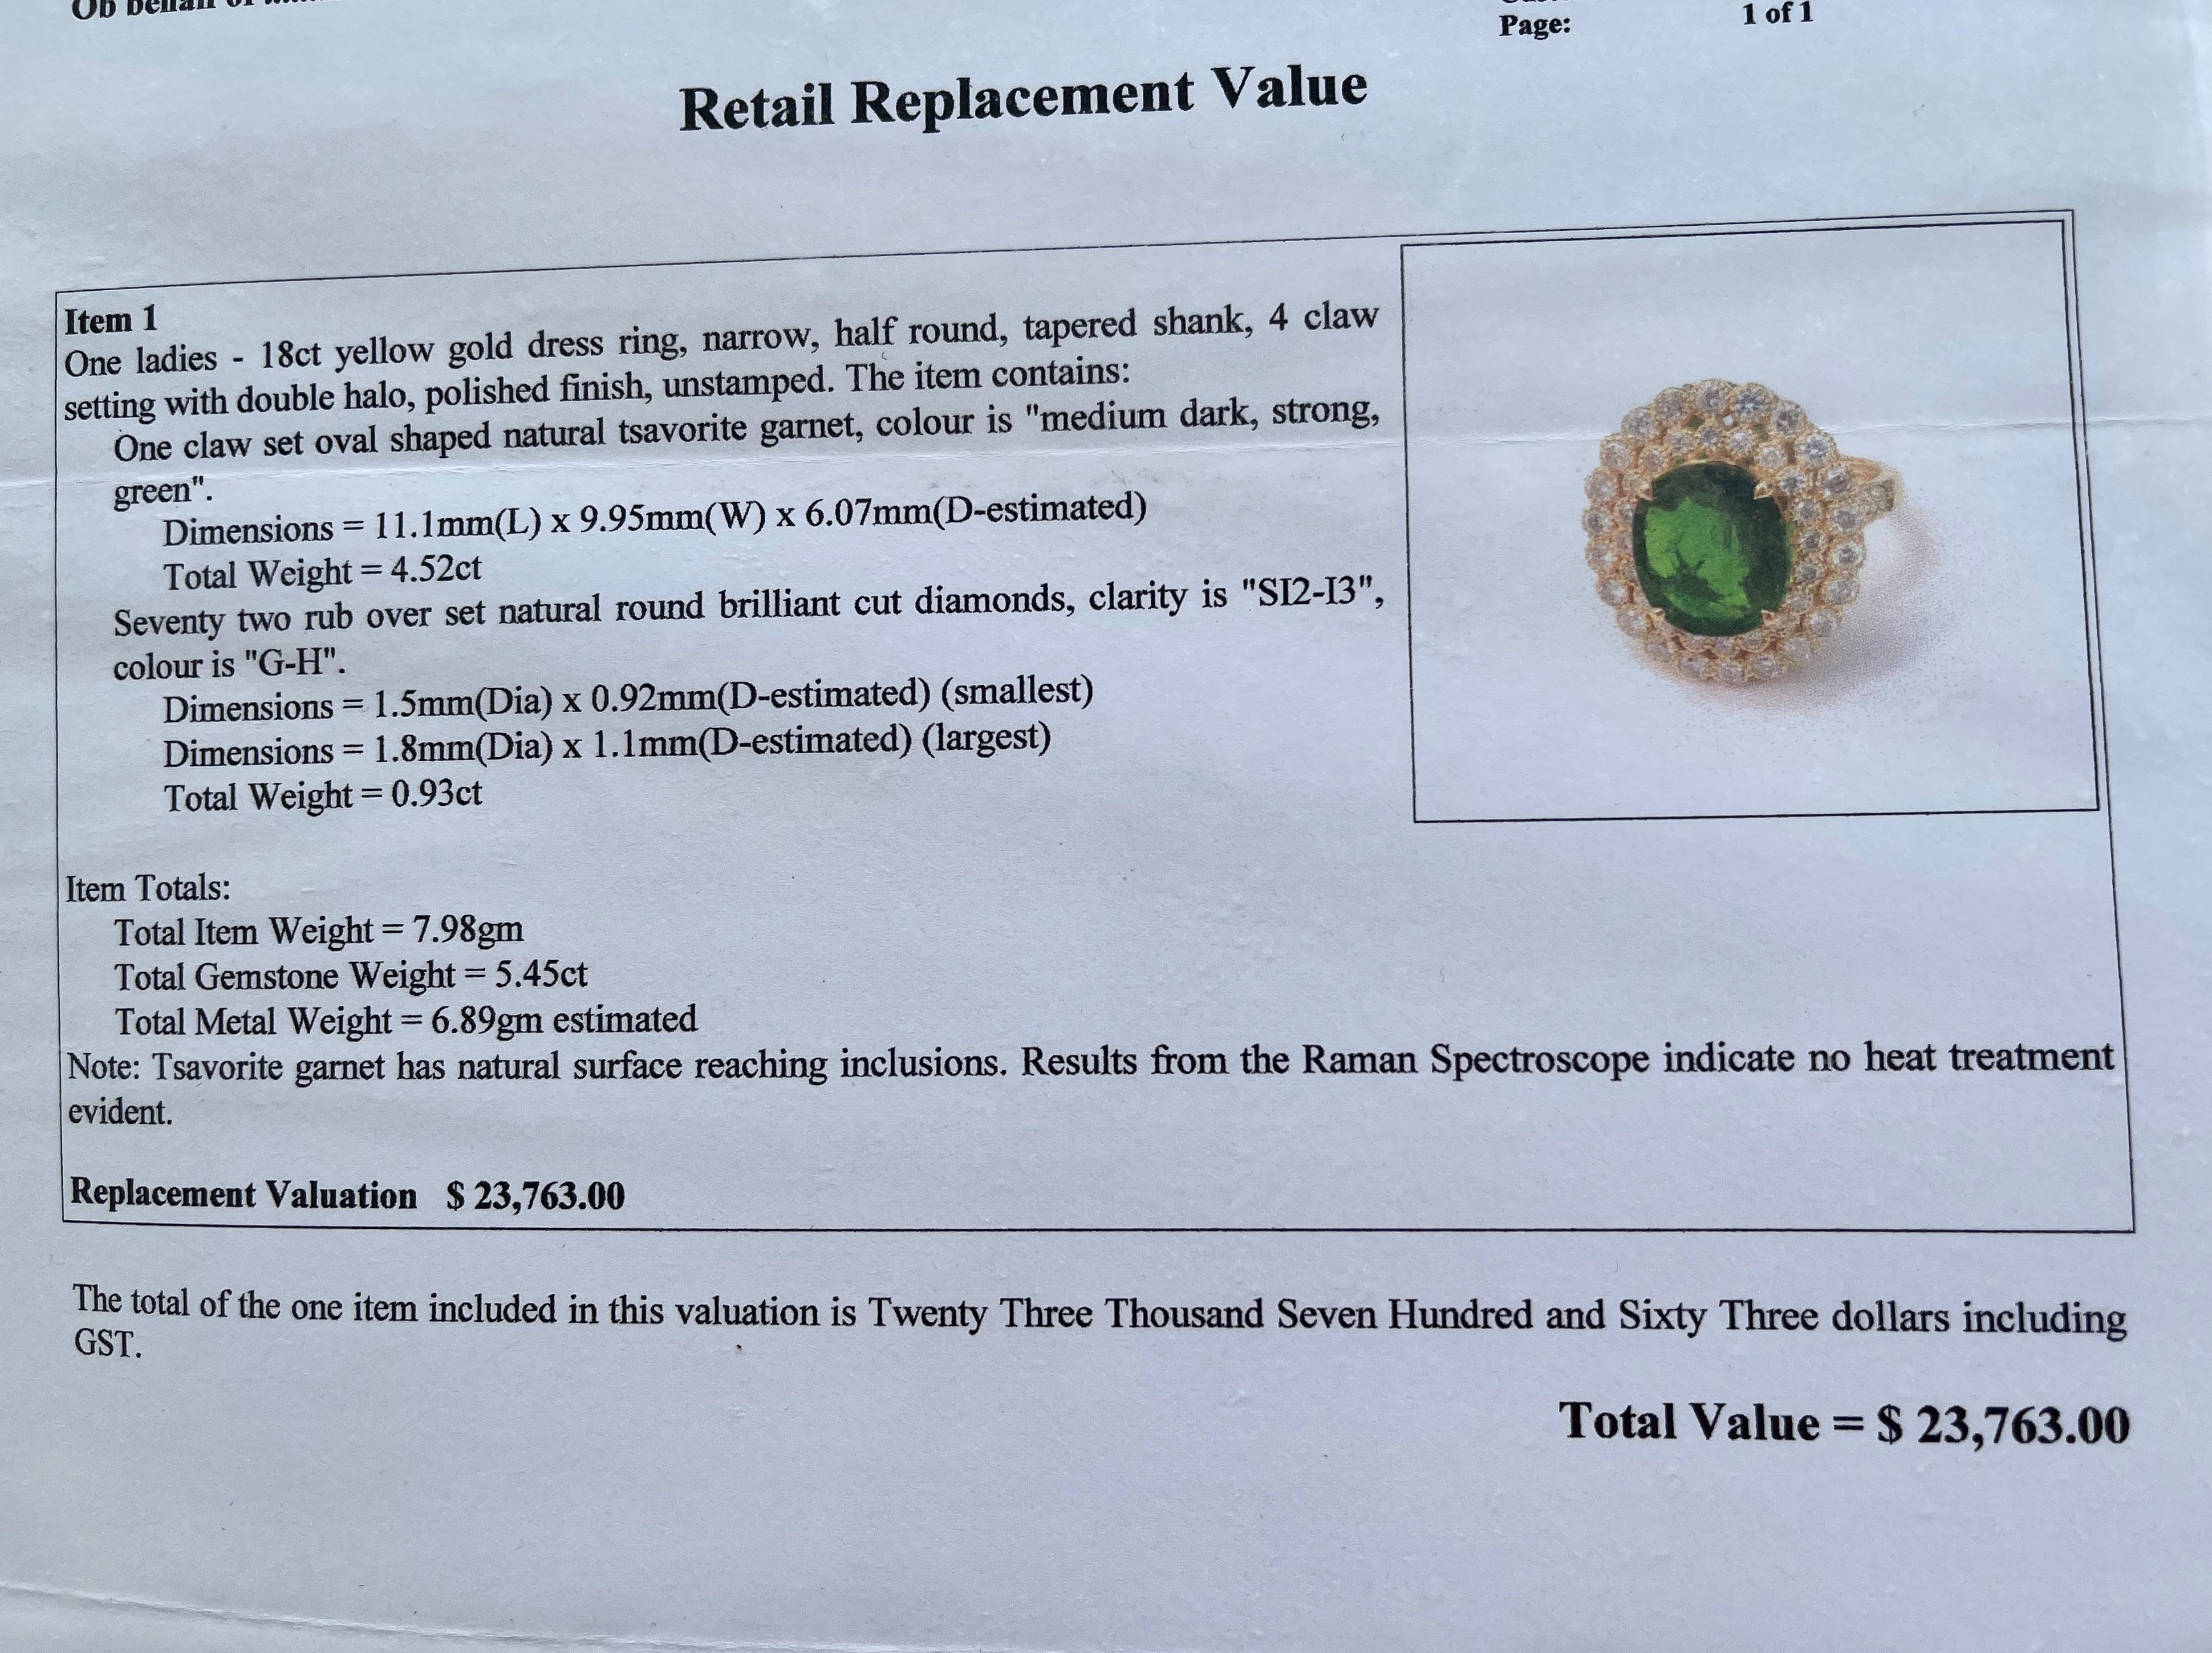 Oval Cut Huge Natural 4.52ct Tsavorite Garnet Diamond Ring 18ct Yellow Gold Valuation For Sale